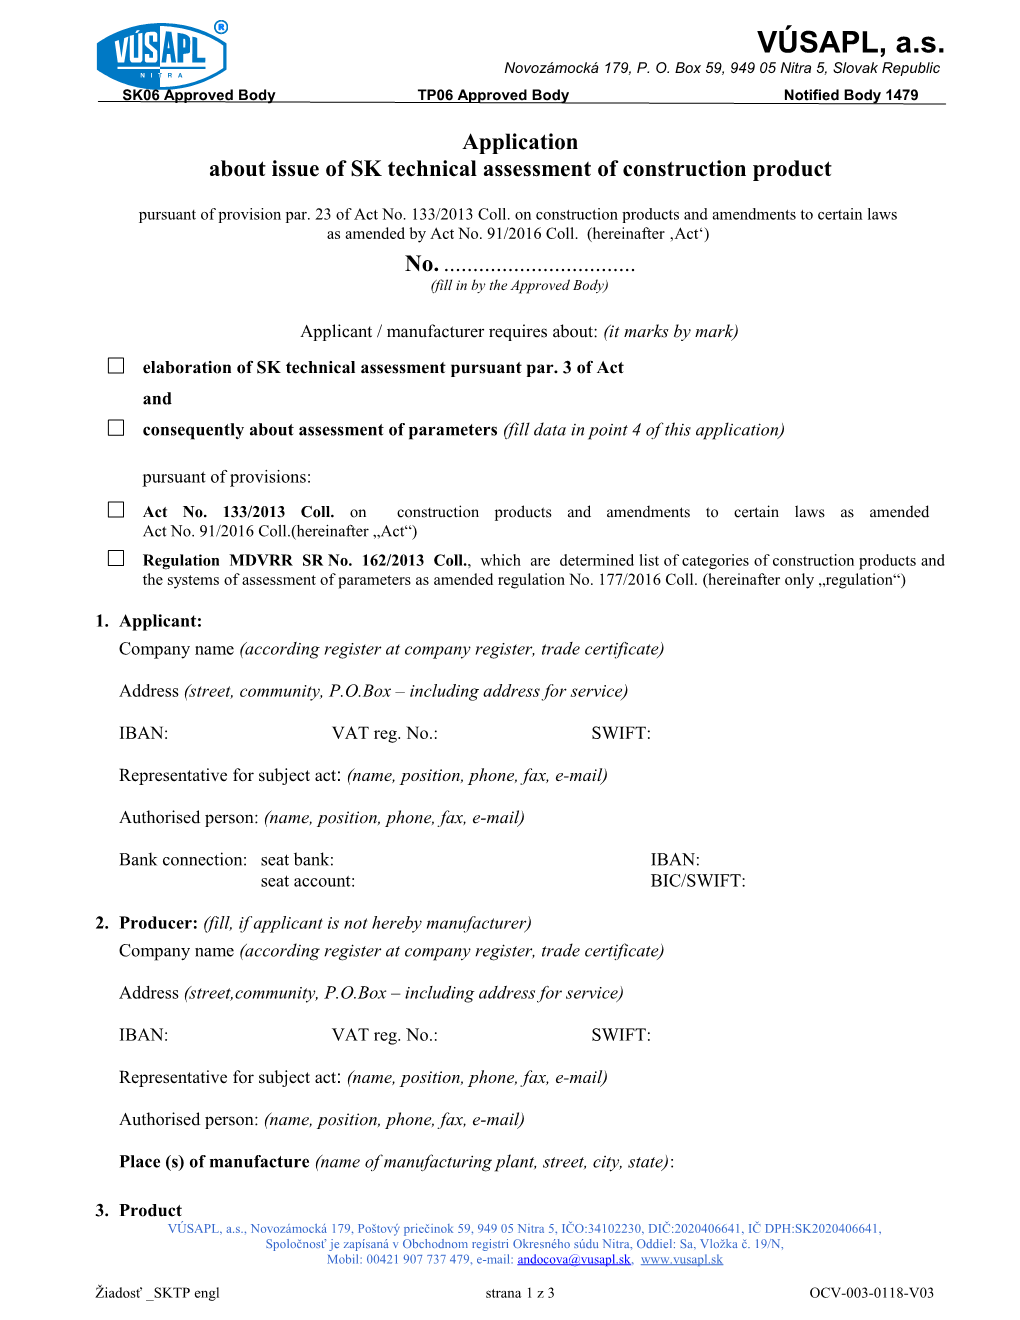 Application About Issueof SK Technical Assessmentof Construction Product